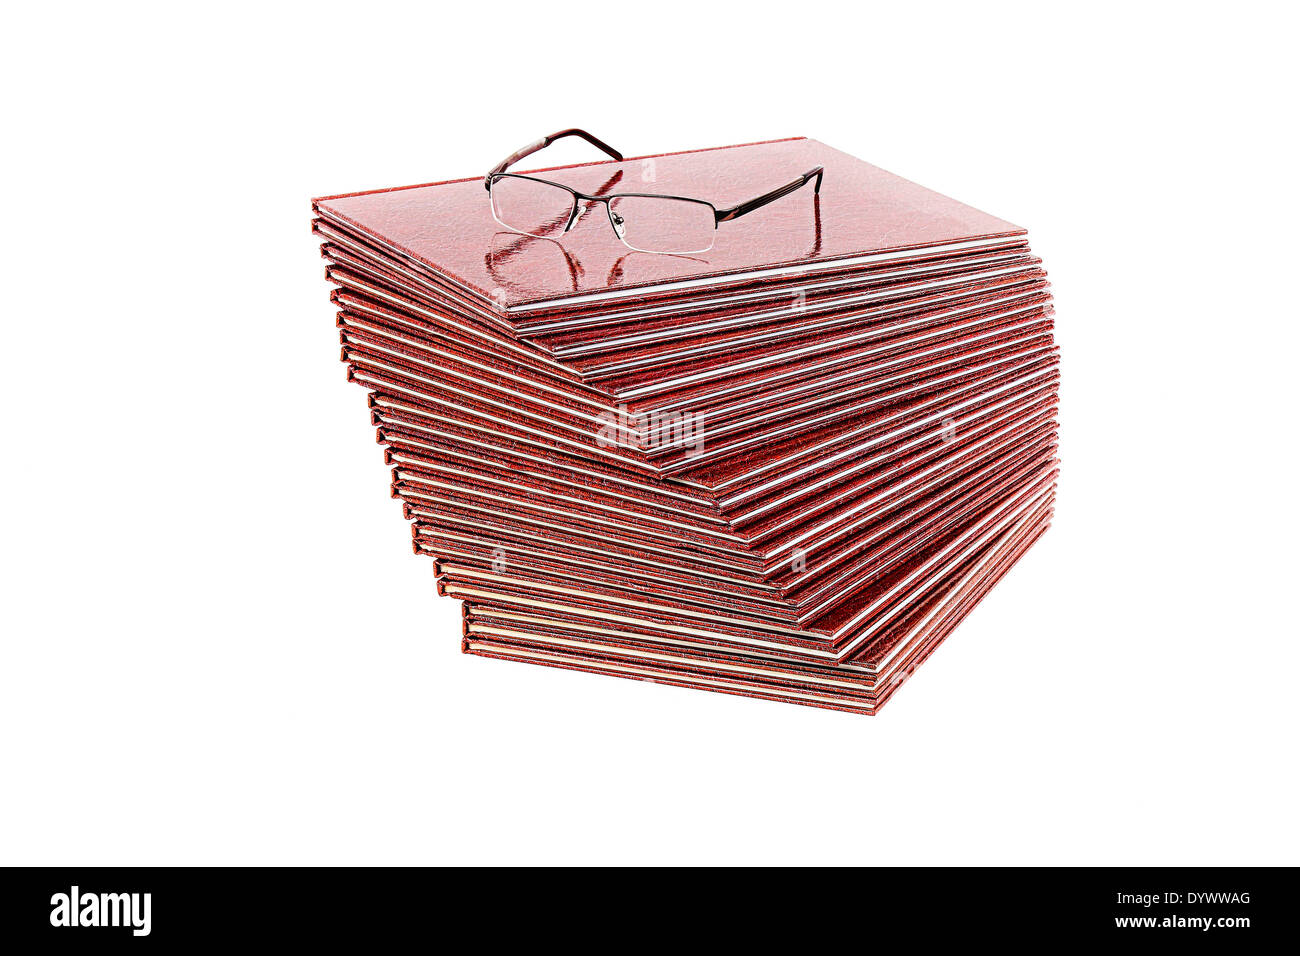 Pile of books and glasses on white background Stock Photo